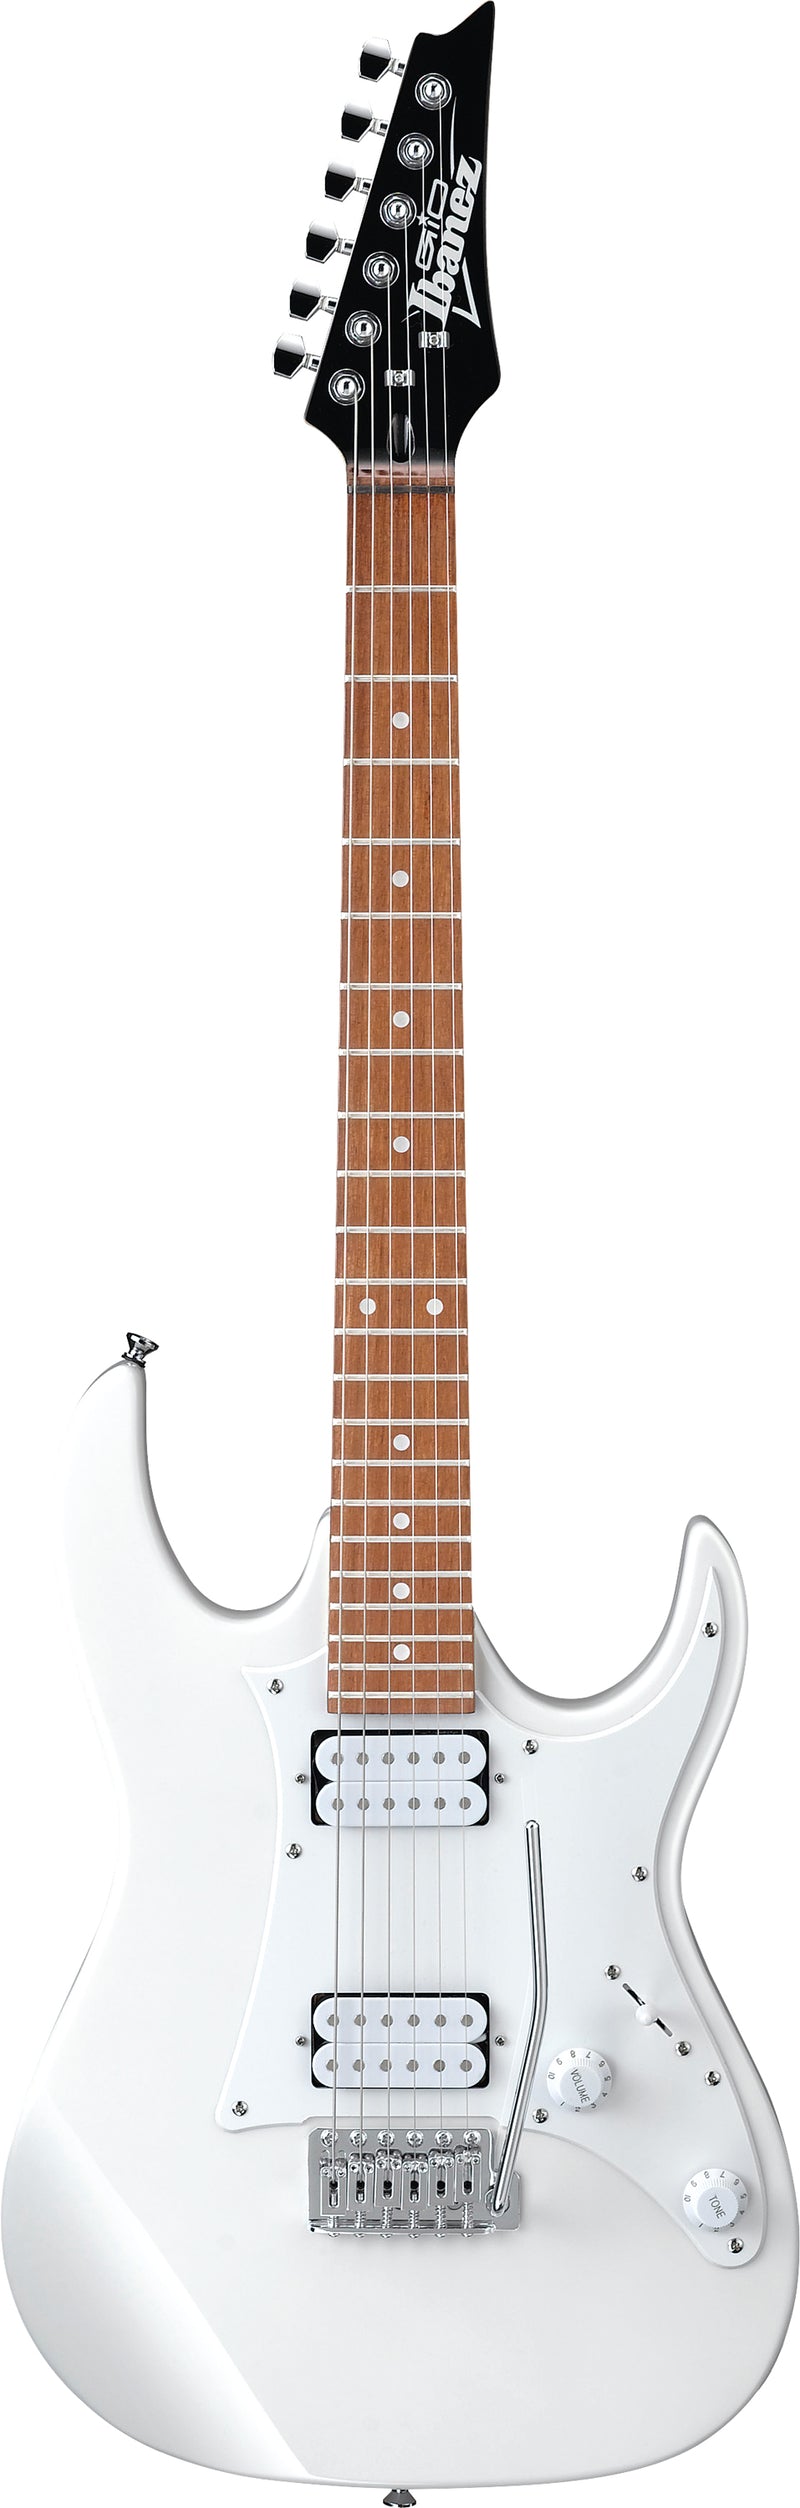 Ibanez GIO RX Series Short Scale Electric Guitar (White)